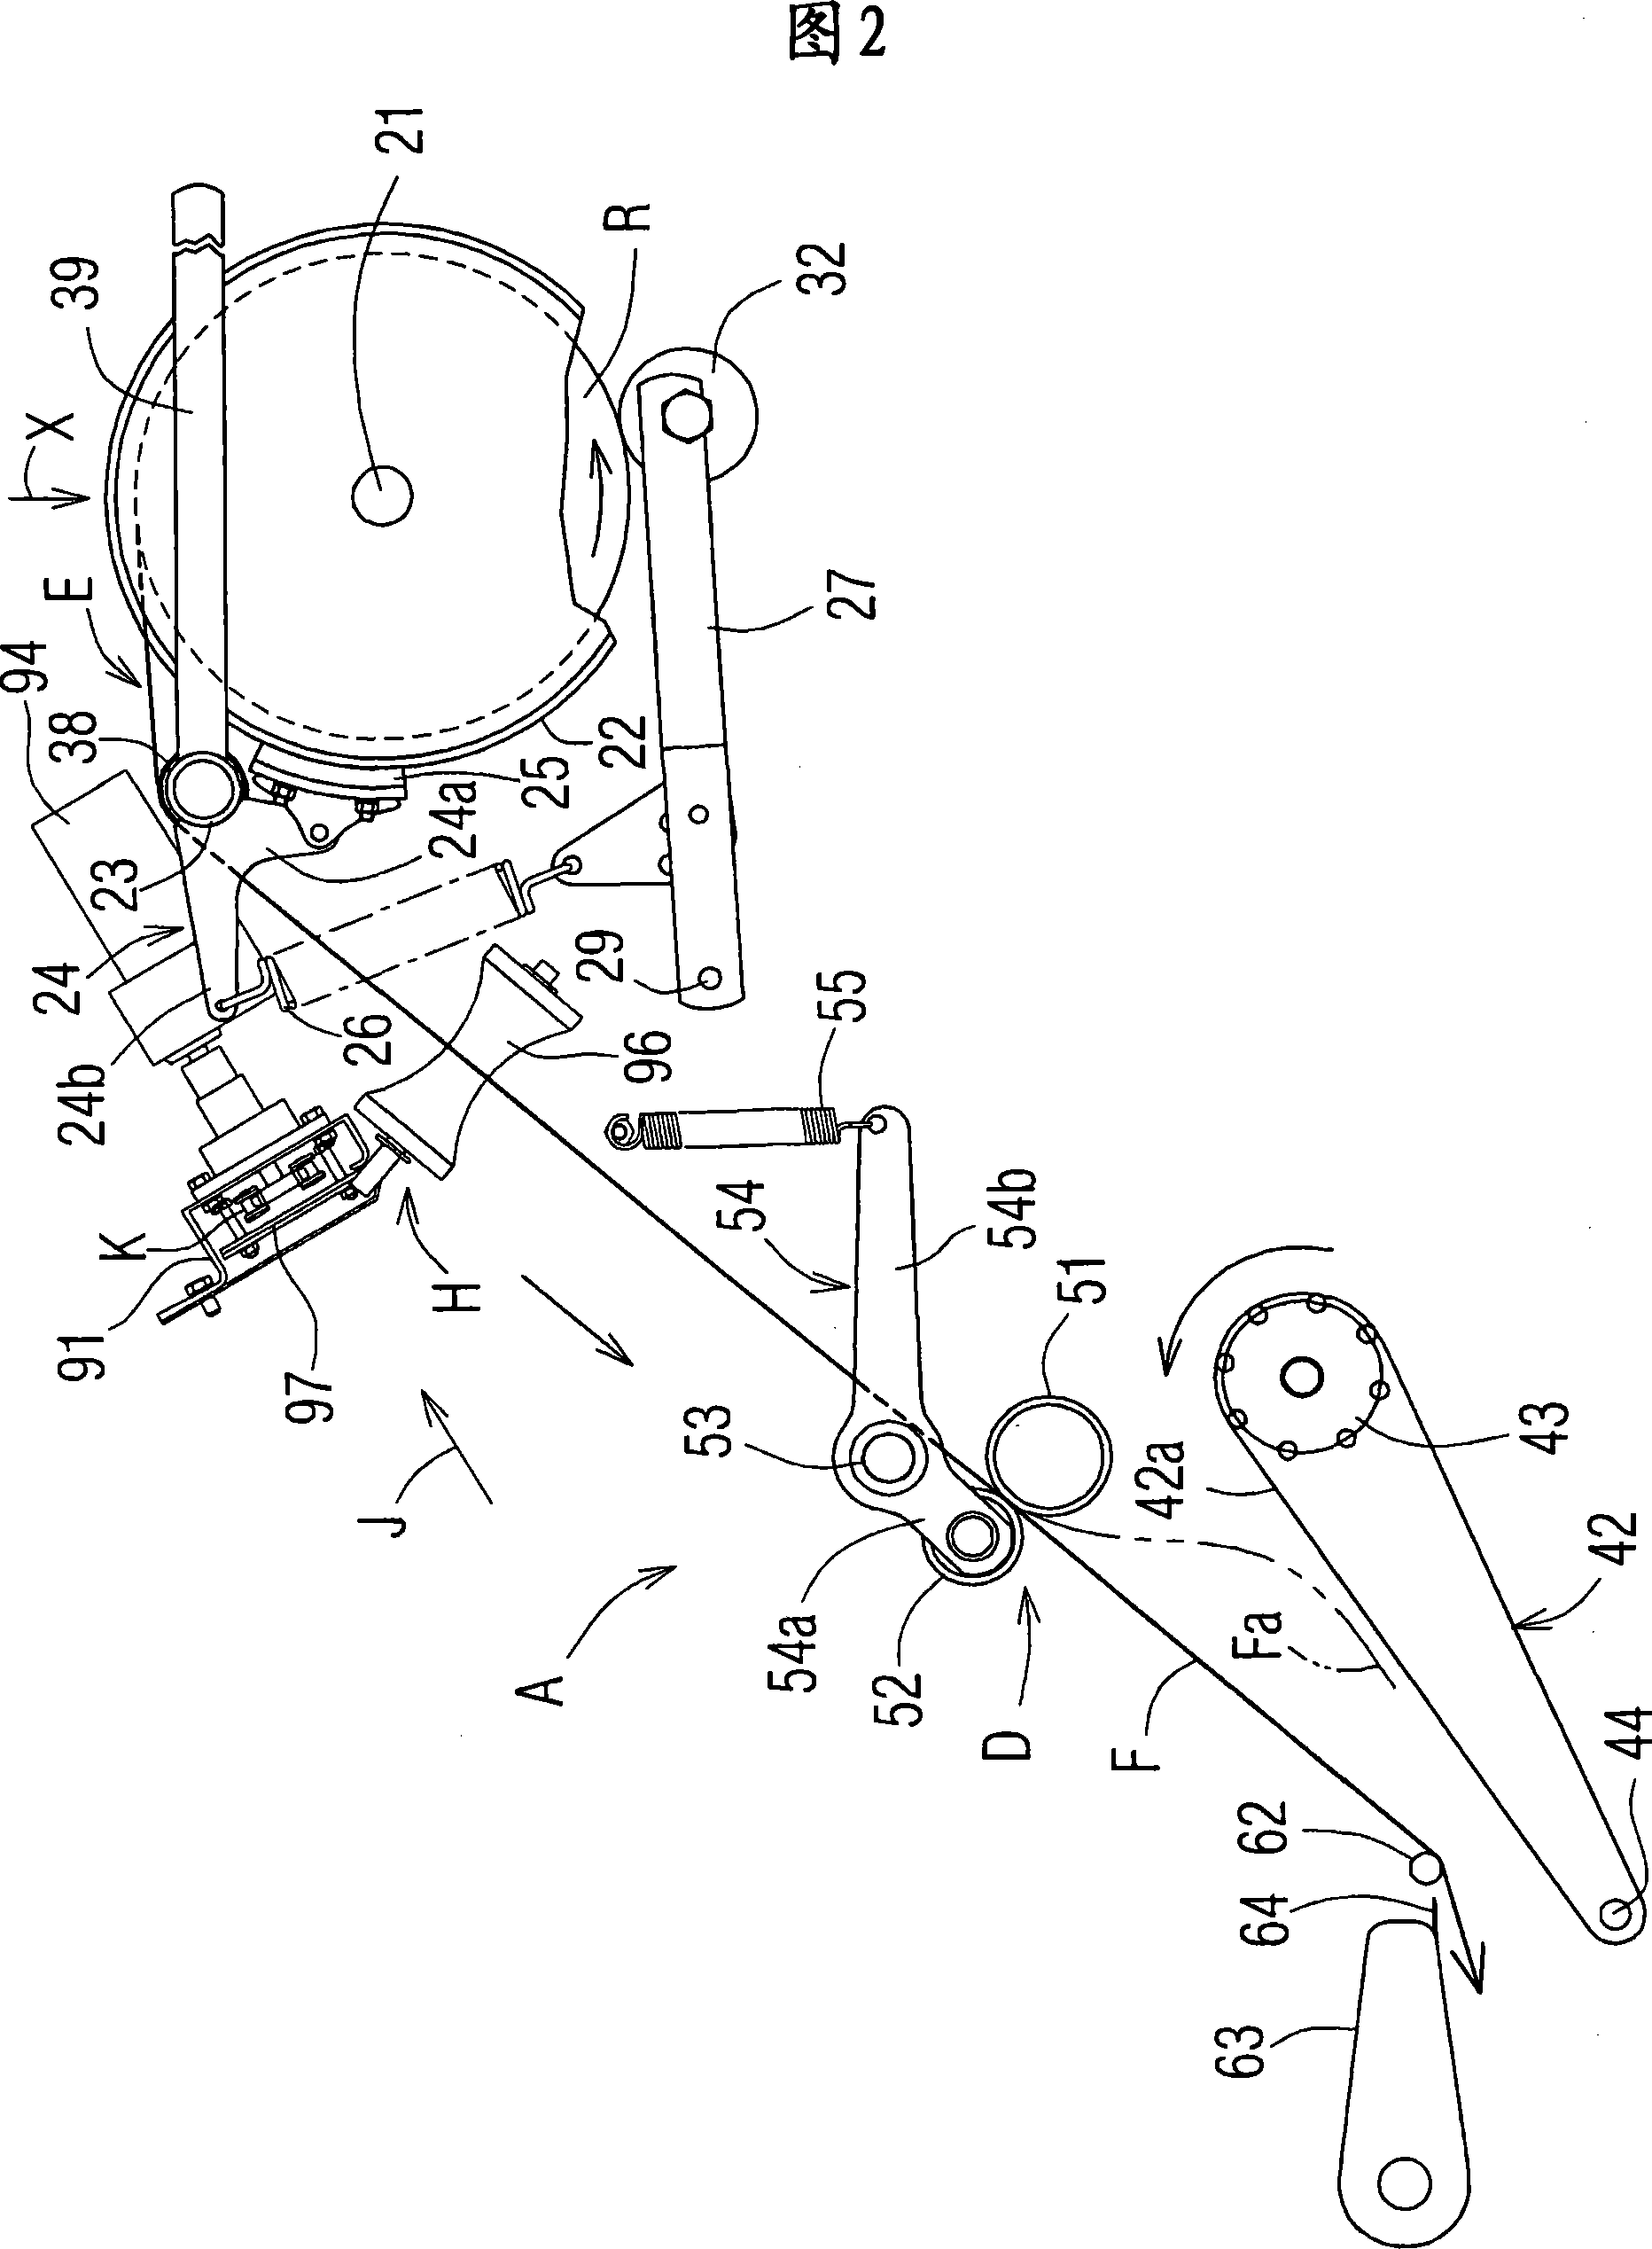 Film letting-off device for roll baler, and method for winding film on rolled bale